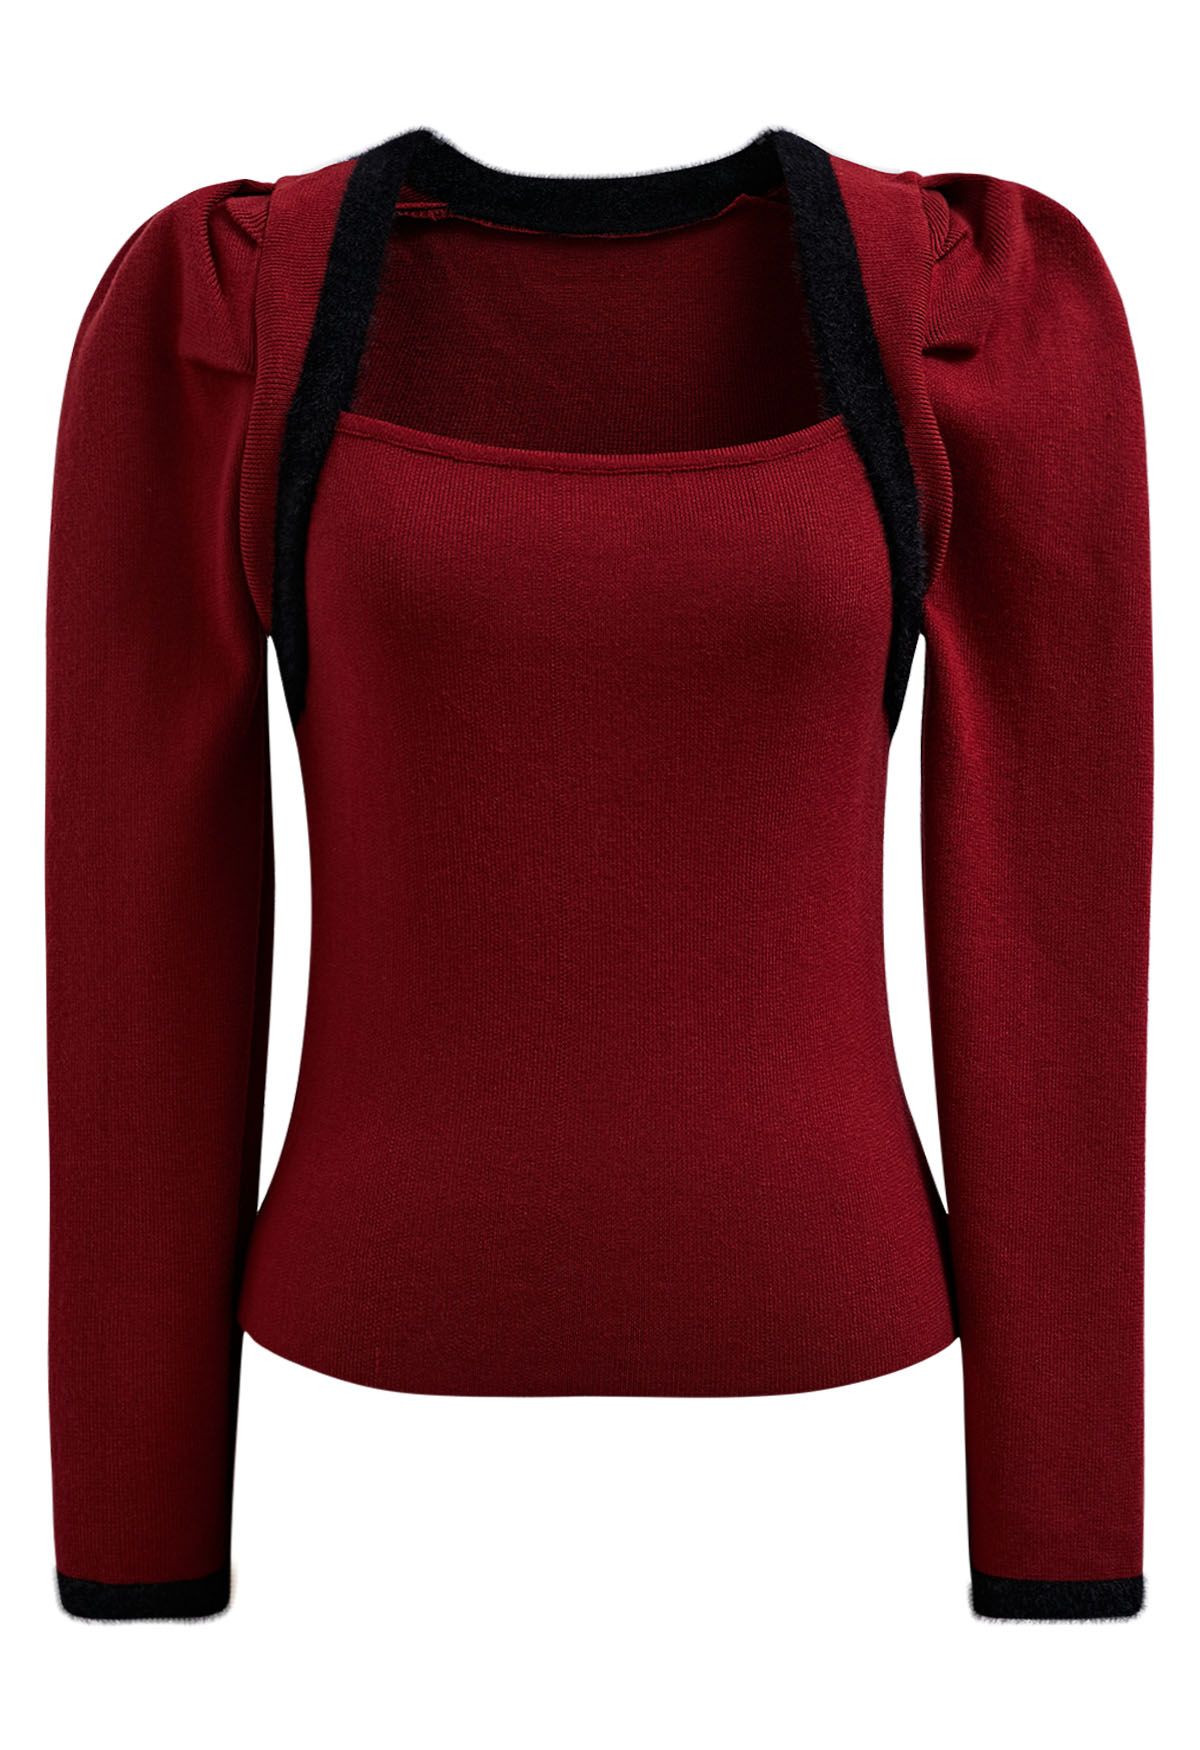 Gigot Sleeve Square Neck Knit Top in Red